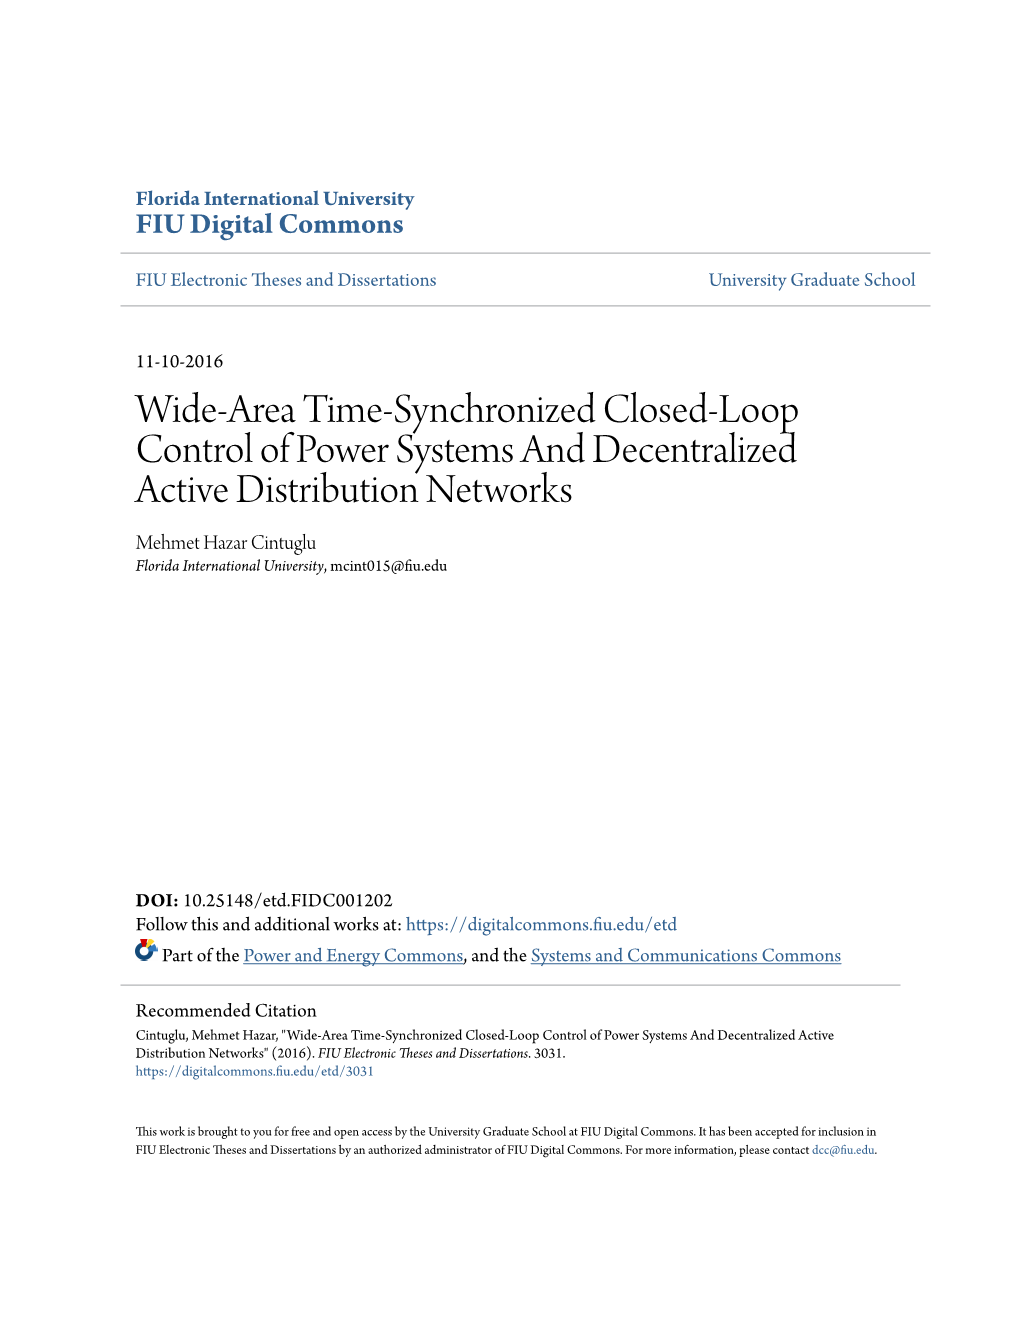 Wide-Area Time-Synchronized Closed-Loop Control of Power Systems